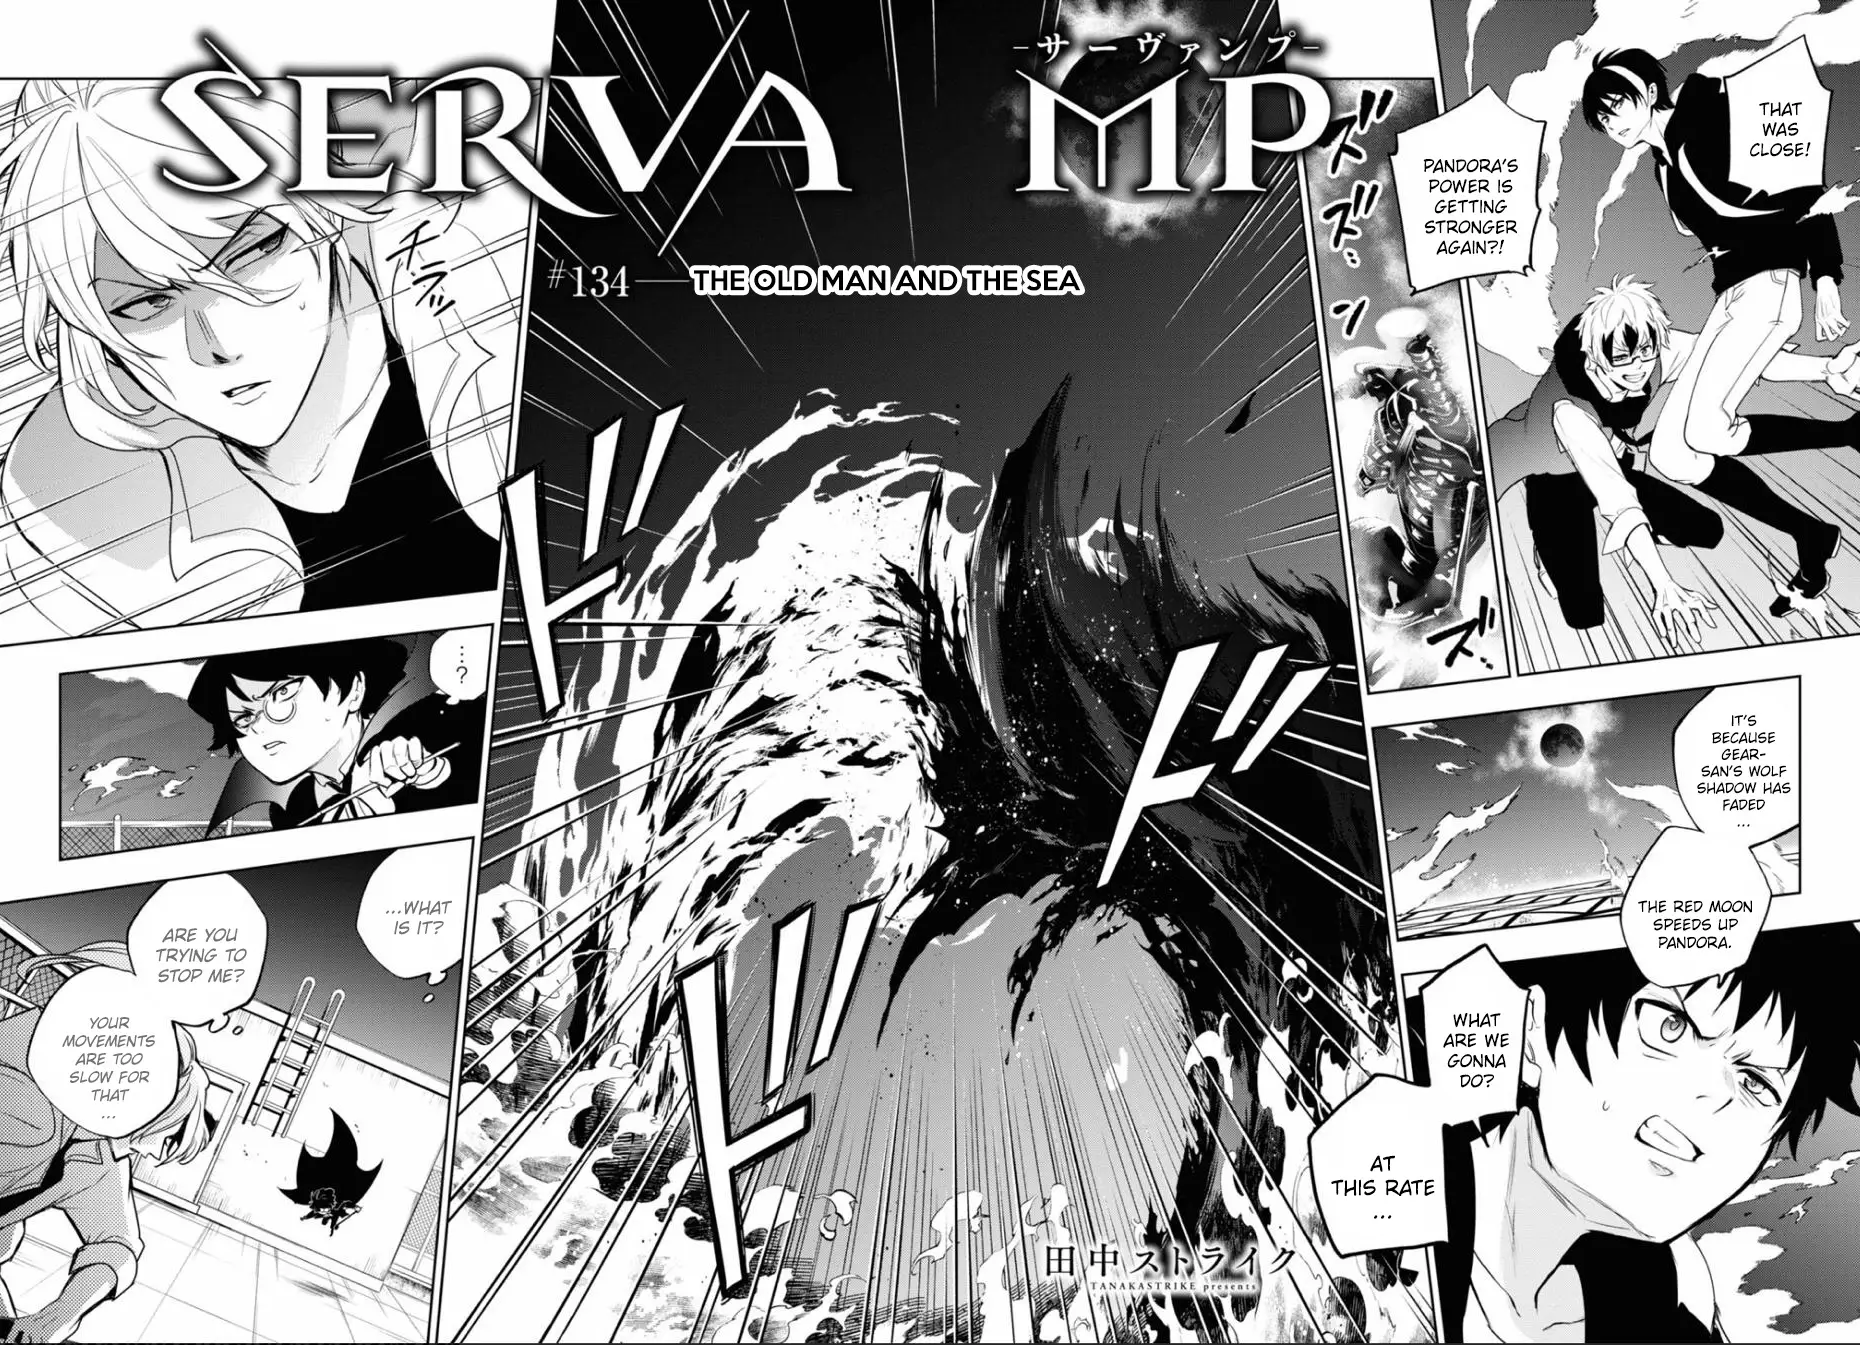 Servamp - 134 page 1-16f3accc